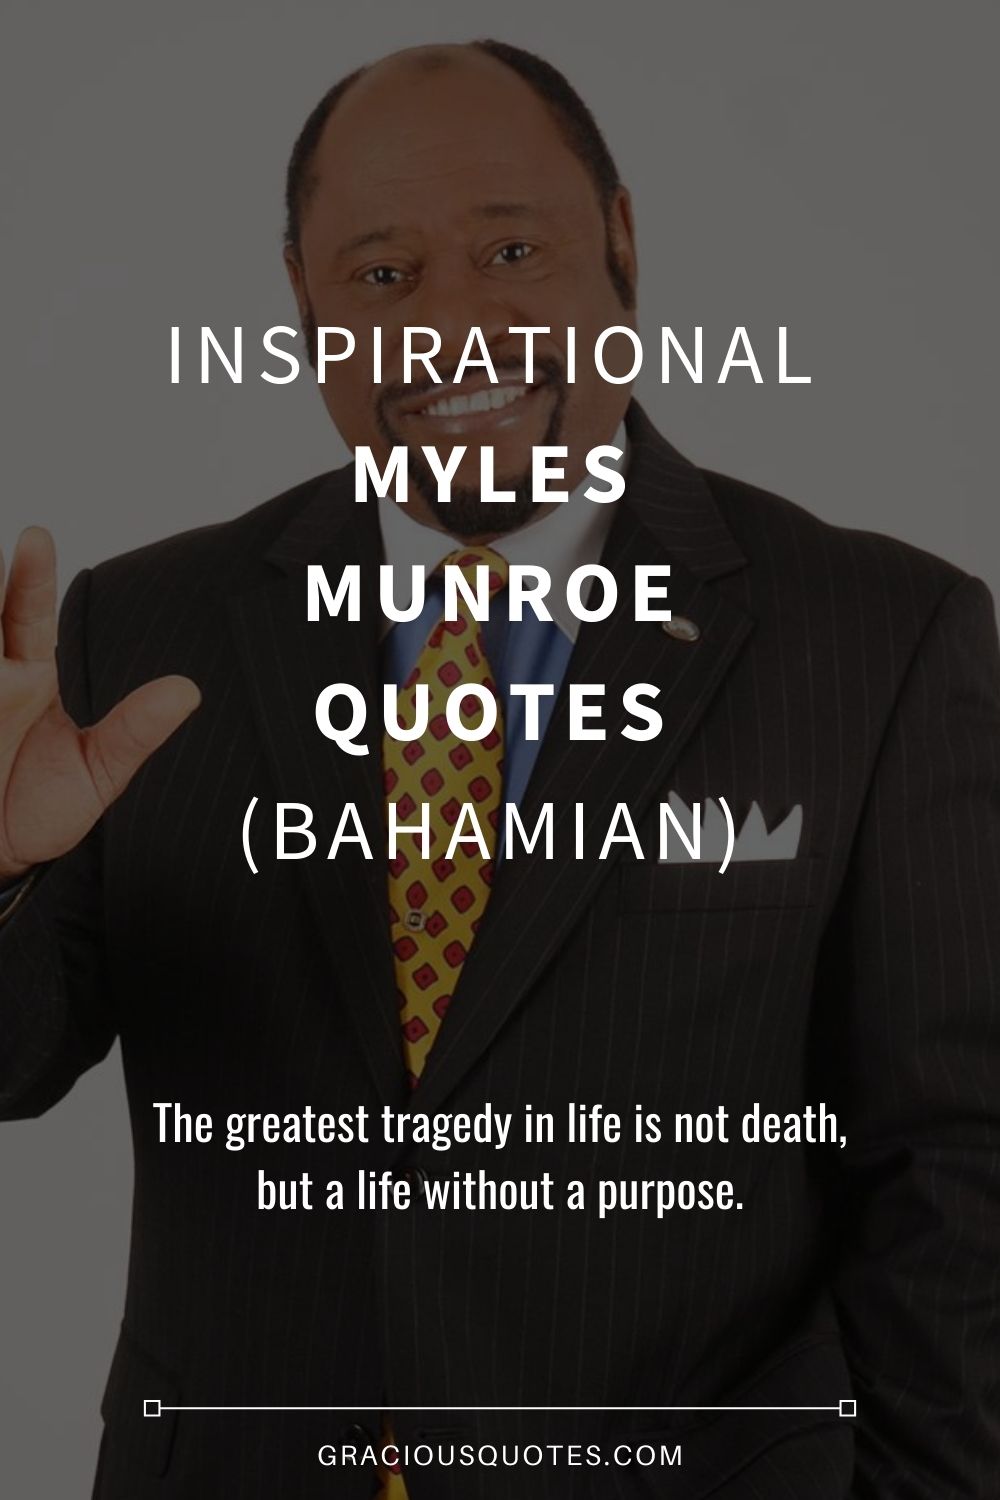 Inspirational Myles Munroe Quotes (BAHAMIAN) - Gracious Quotes